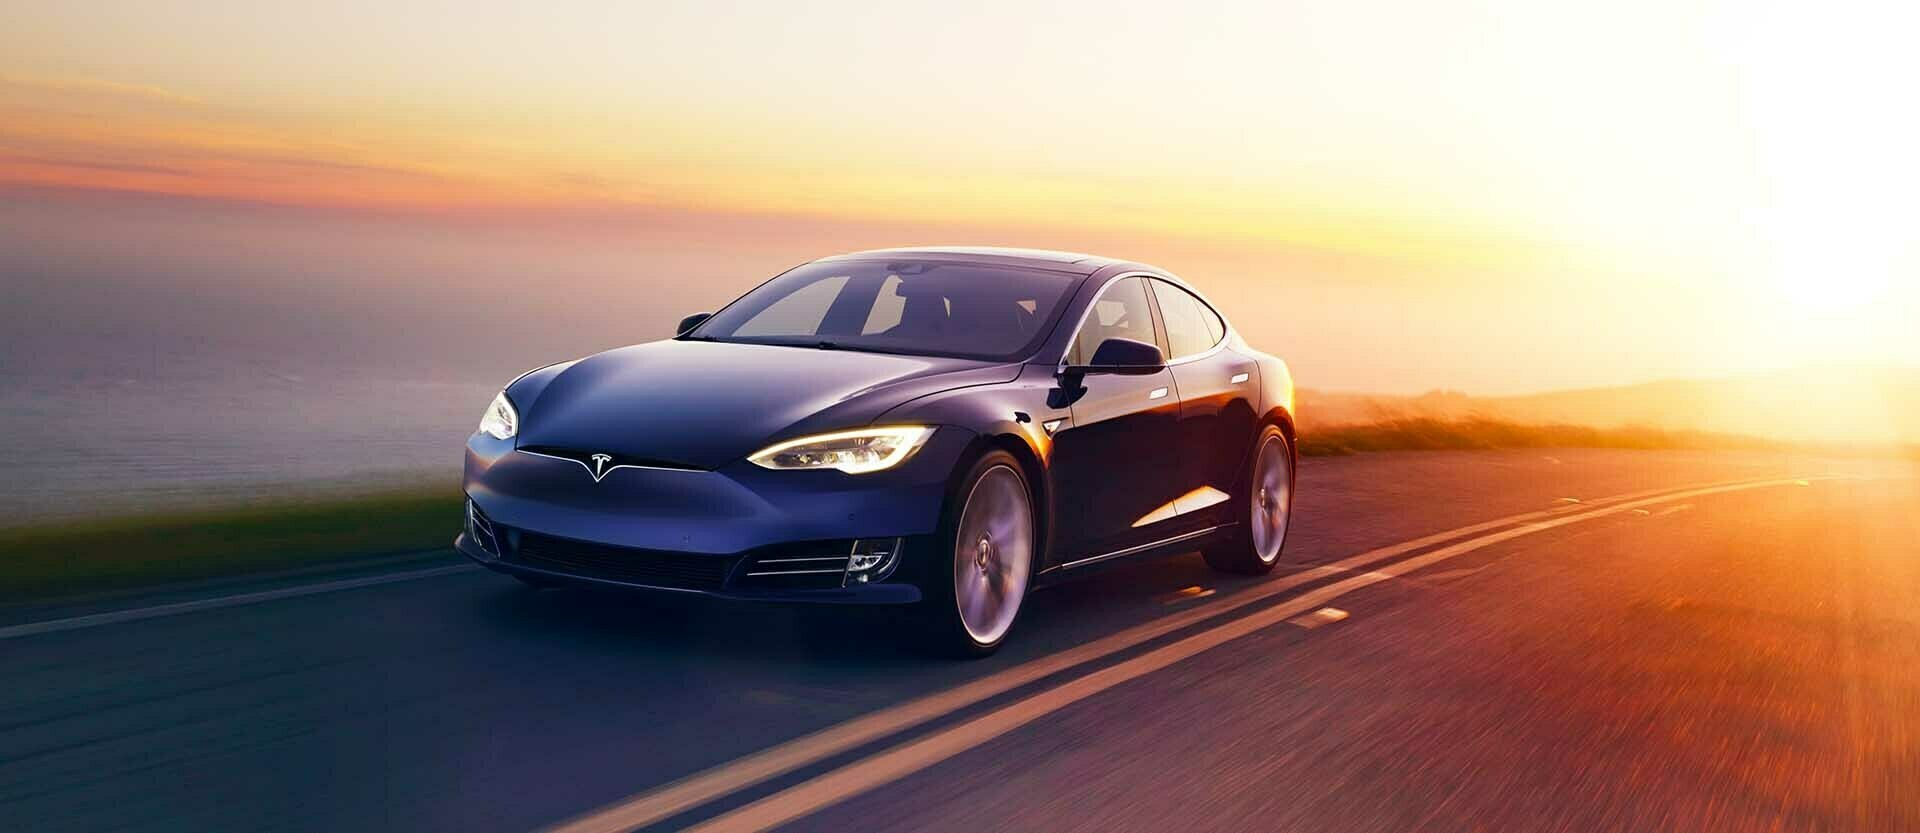 A blue Tesla Model S on an open road with the sea to its right and bright sunlight behind it to the left.